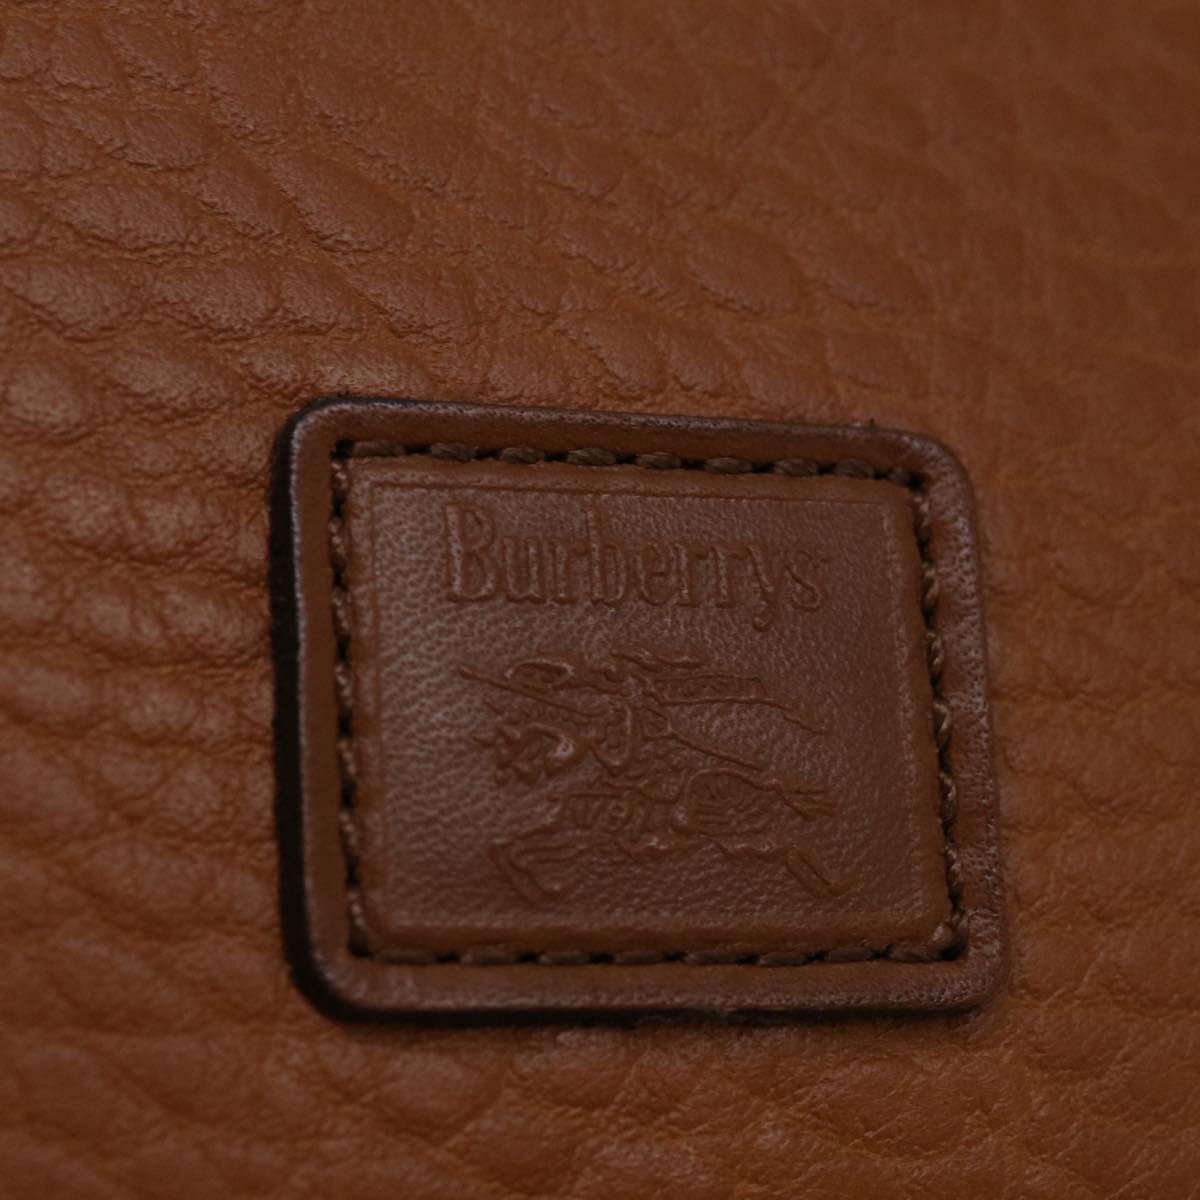 Burberrys Clutch Bag Leather Brown Auth bs12584